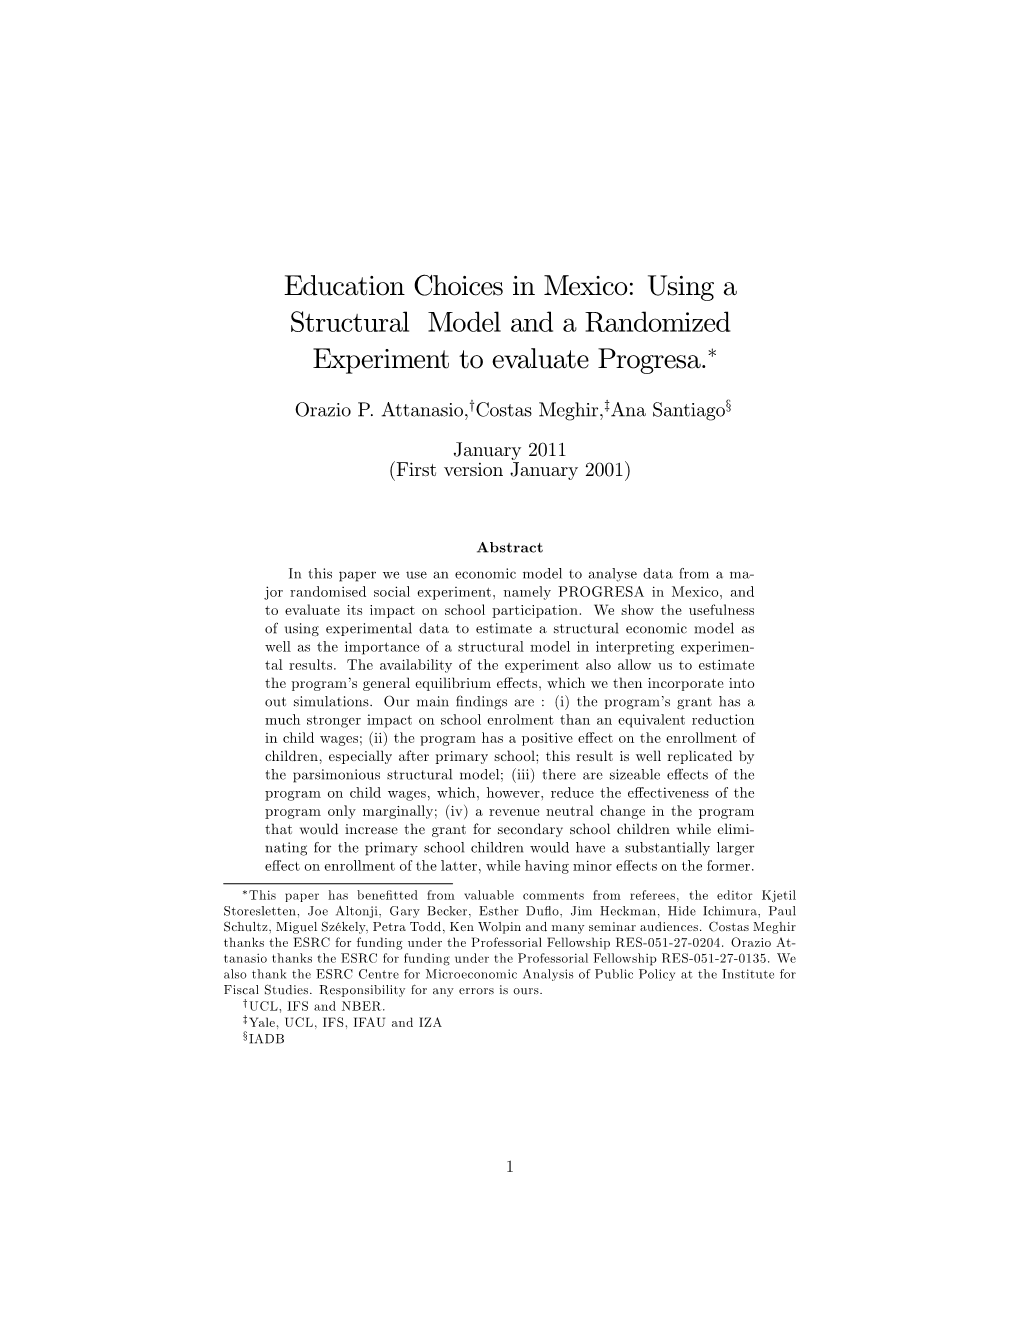 Education Choices in Mexico: Using a Structural Model and a Randomized Experiment to Evaluate Progresa.